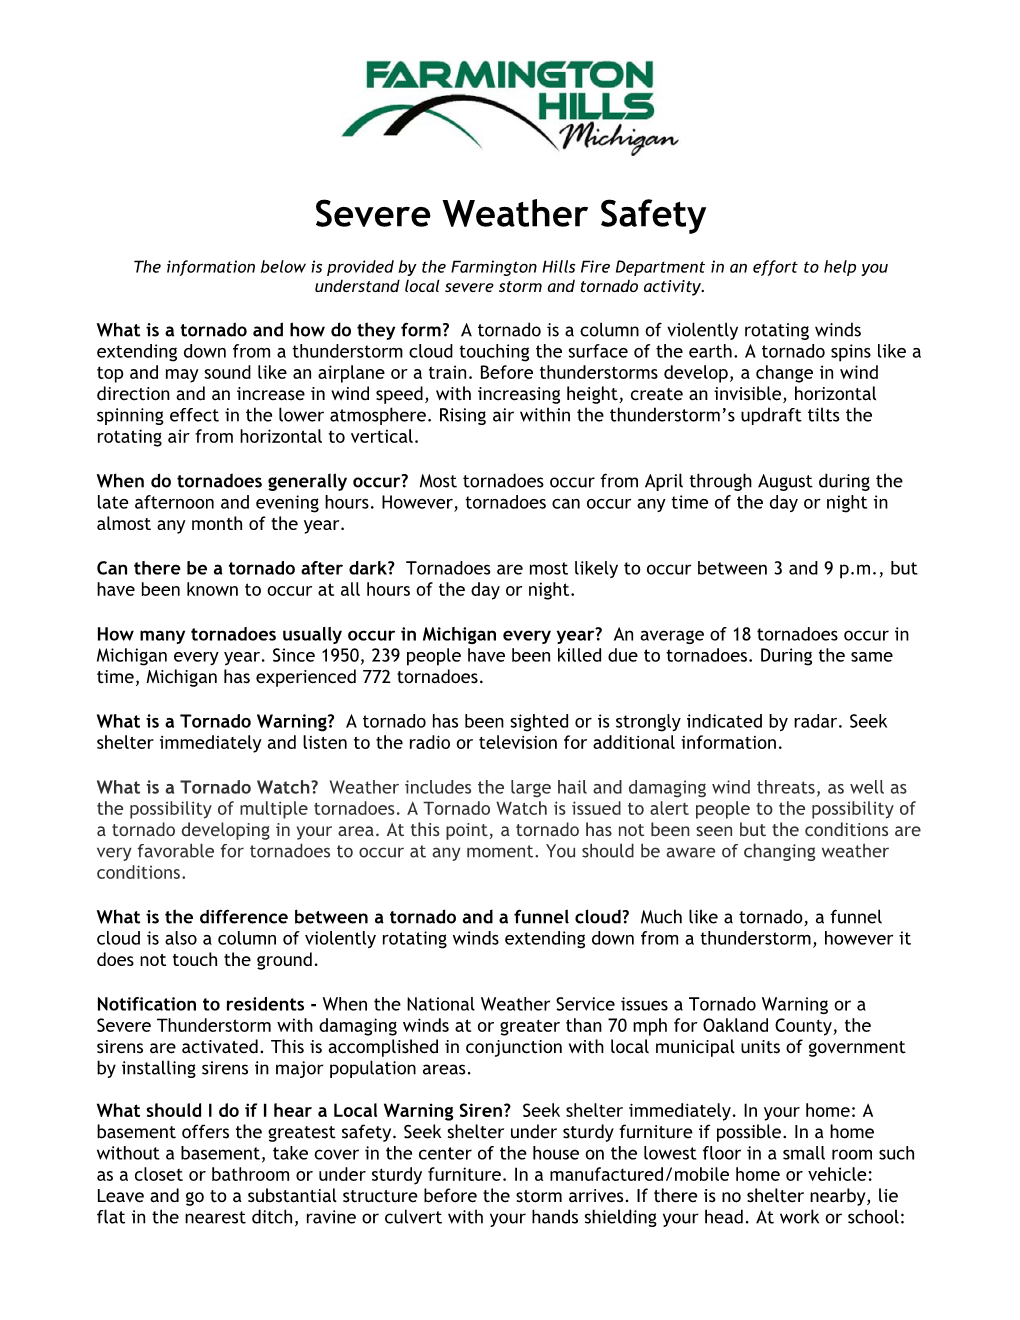 Severe Weather Safety Information